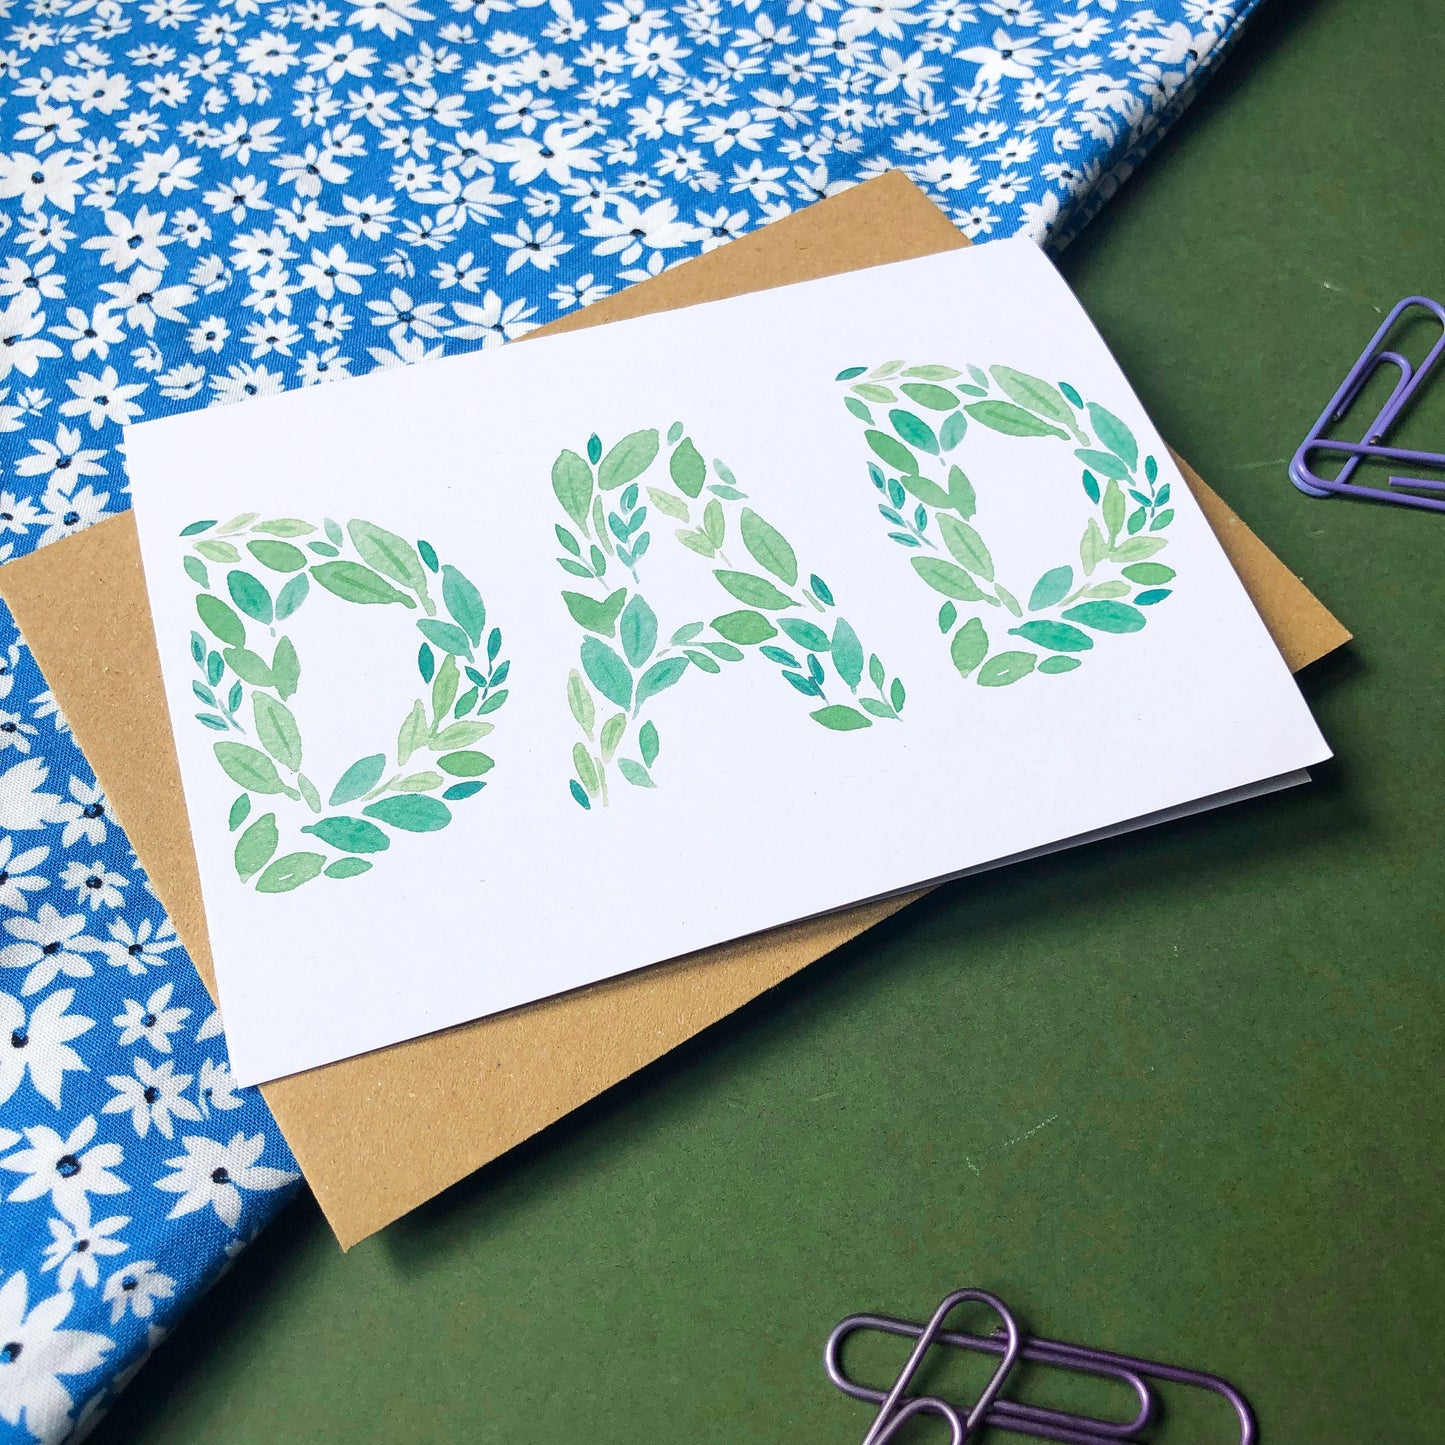 A Father's Day card with the word "DAD" spelled out beautifully in green leaves of various shades and shapes. The card offers a simple yet elegant way to show appreciation and affection for a beloved dad on his special day.